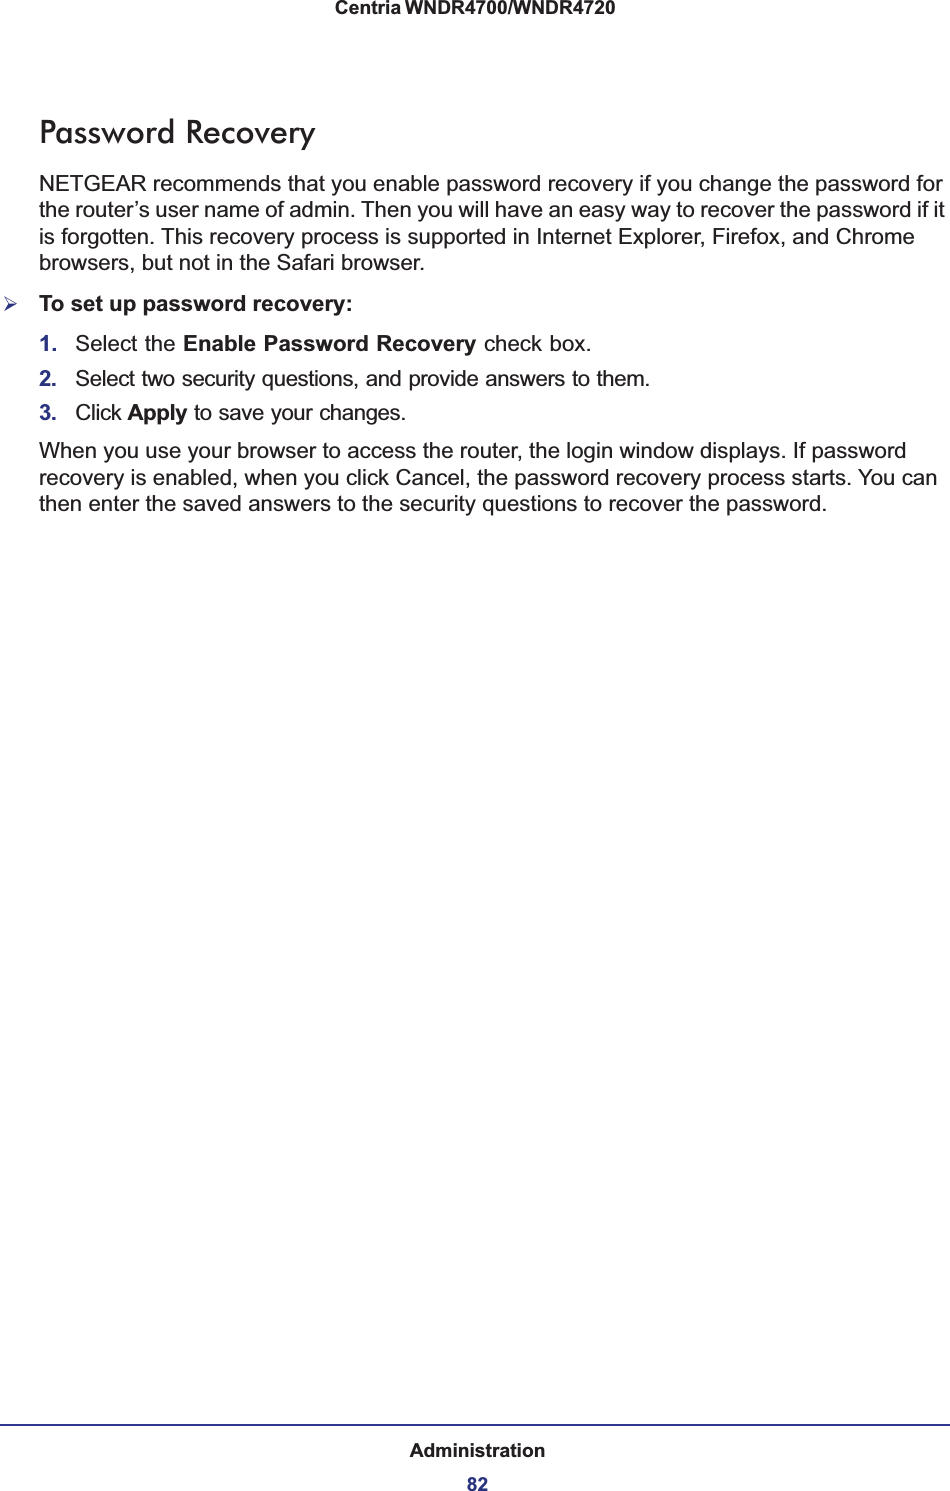 Administration82Centria WNDR4700/WNDR4720 Password RecoveryNETGEAR recommends that you enable password recovery if you change the password for the router’s user name of admin. Then you will have an easy way to recover the password if it is forgotten. This recovery process is supported in Internet Explorer, Firefox, and Chrome browsers, but not in the Safari browser.¾To set up password recovery:1. Select the Enable Password Recovery check box.2. Select two security questions, and provide answers to them.3. Click Apply to save your changes.When you use your browser to access the router, the login window displays. If password recovery is enabled, when you click Cancel, the password recovery process starts. You can then enter the saved answers to the security questions to recover the password.  